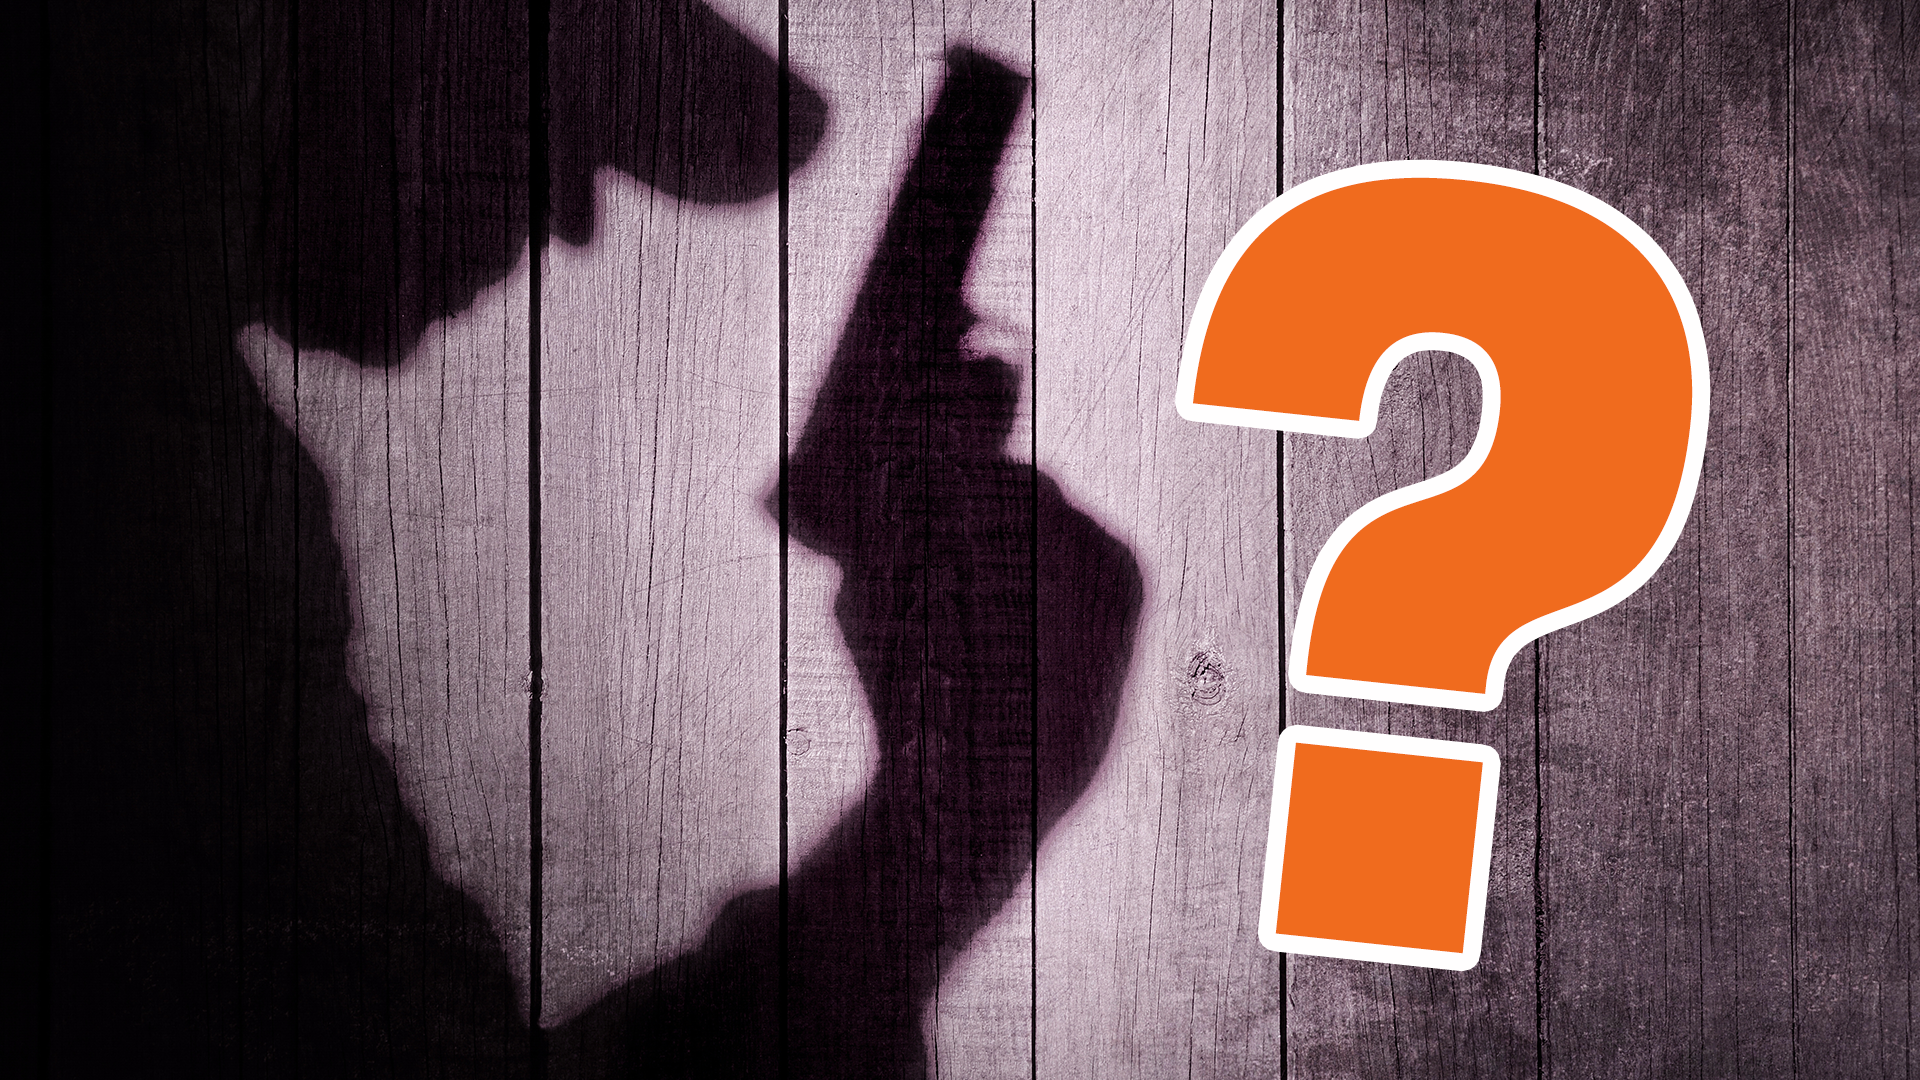 Silhouette of murderer with question mark